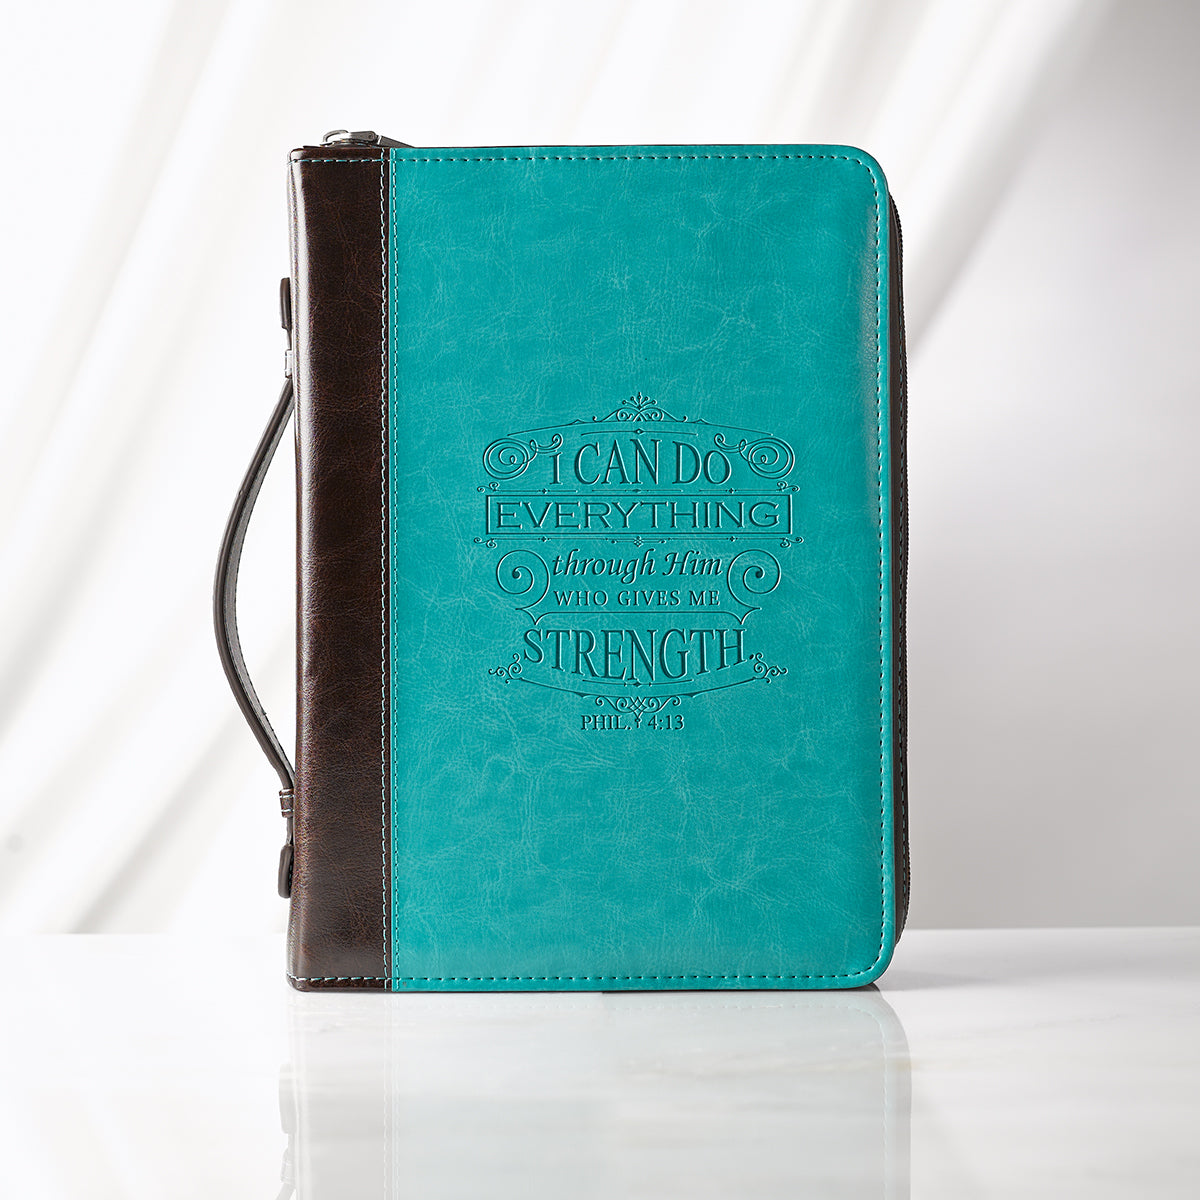 I Can Do Everything Turquoise & Brown Faux Leather Fashion Bible Cover - Philippians 4:13 - The Christian Gift Company